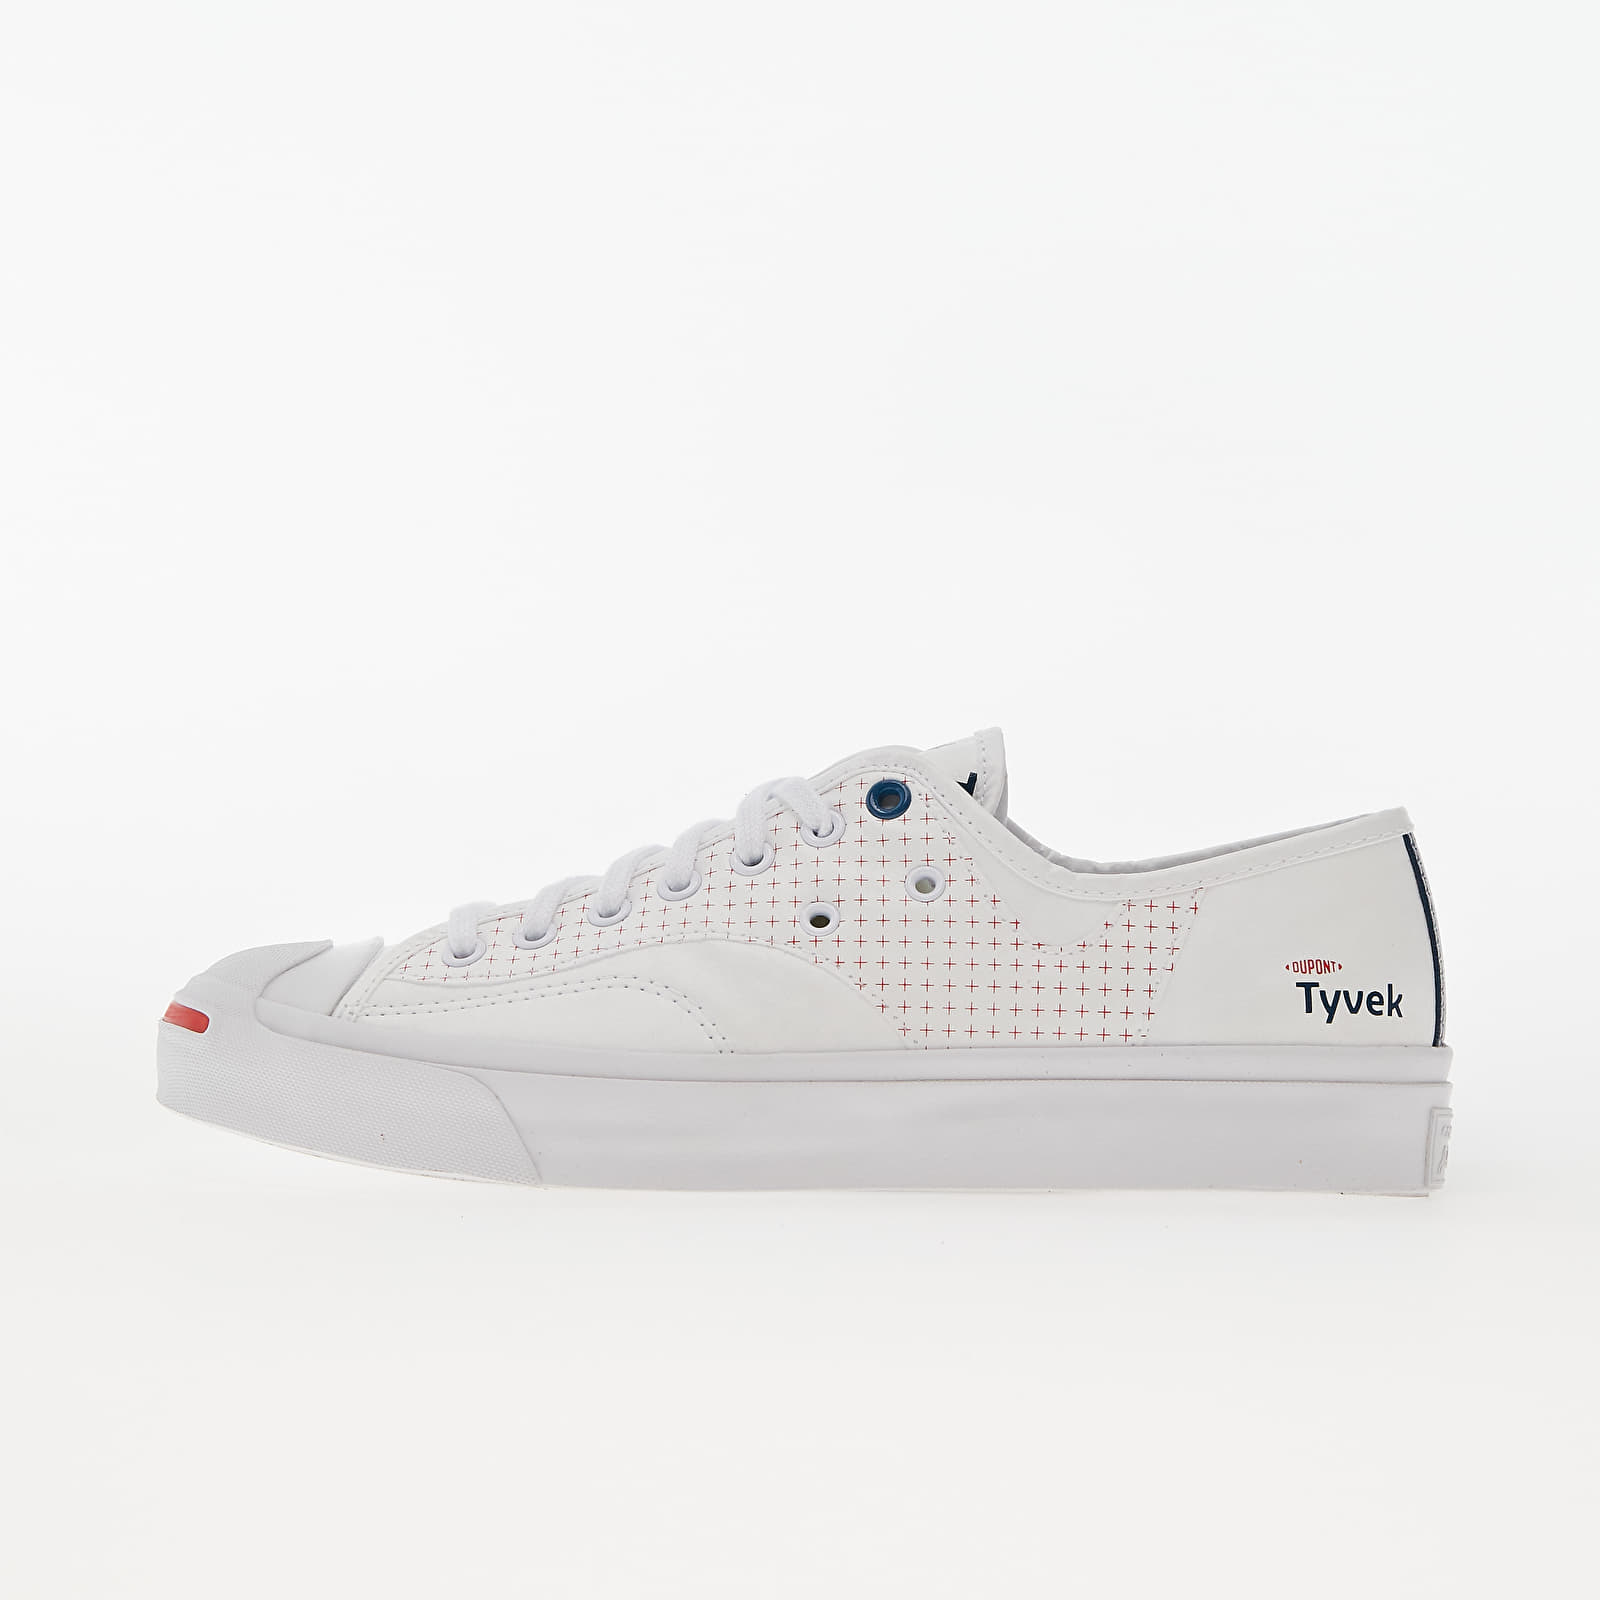 Men's shoes Converse Jack Purcell Rally "Tyvek" White/ Fiery Red/ Princess Blue